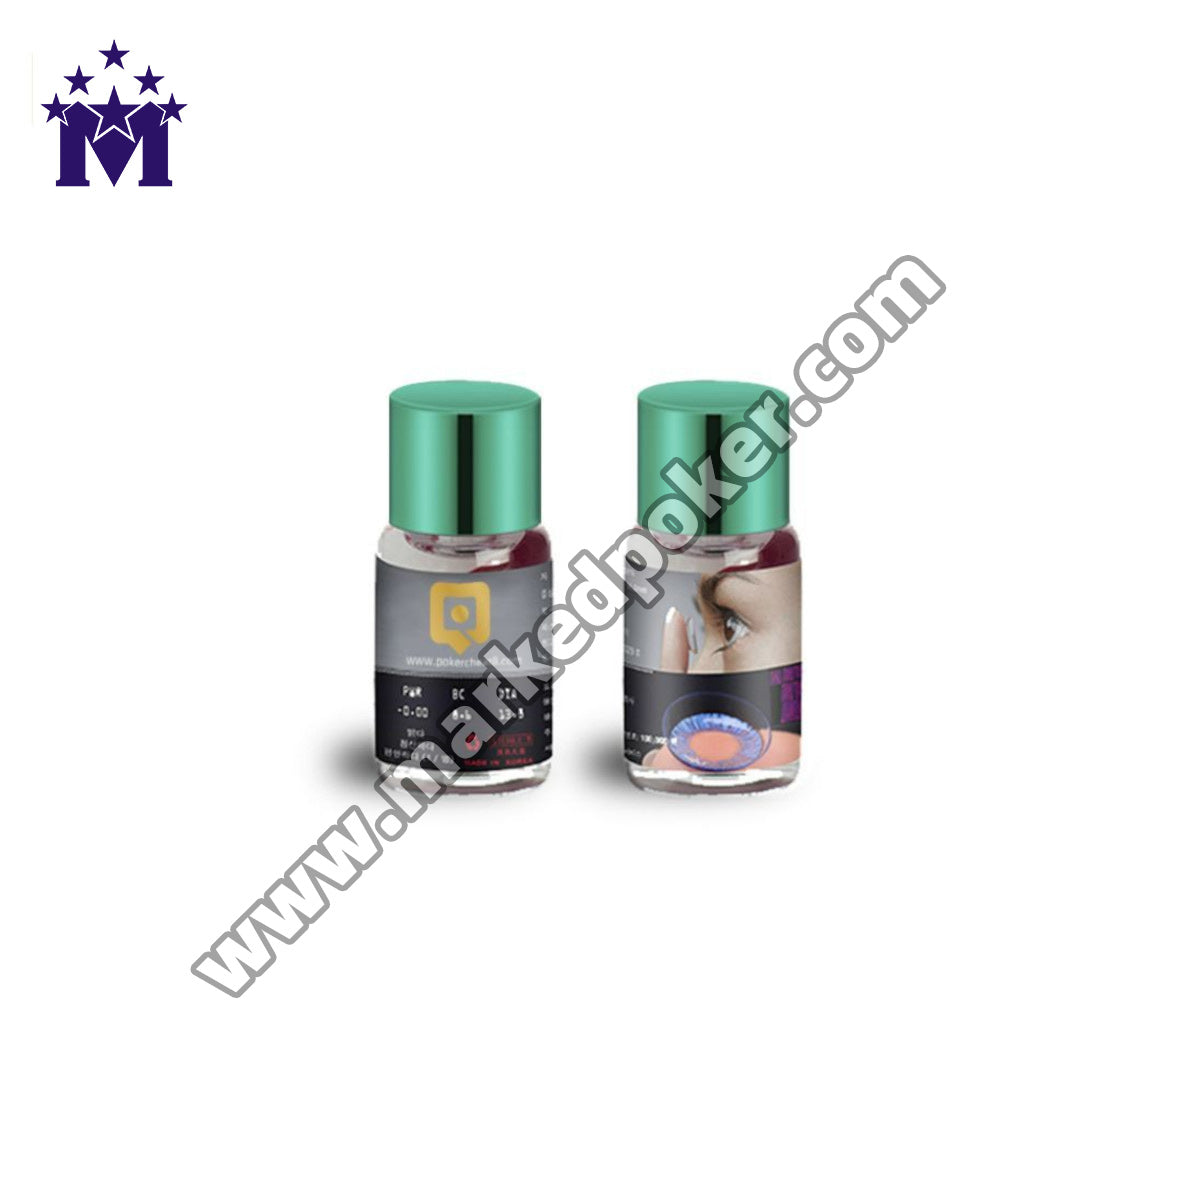 Poker Games Infrared Contact Lenses V23 for Infrared Marked Cards